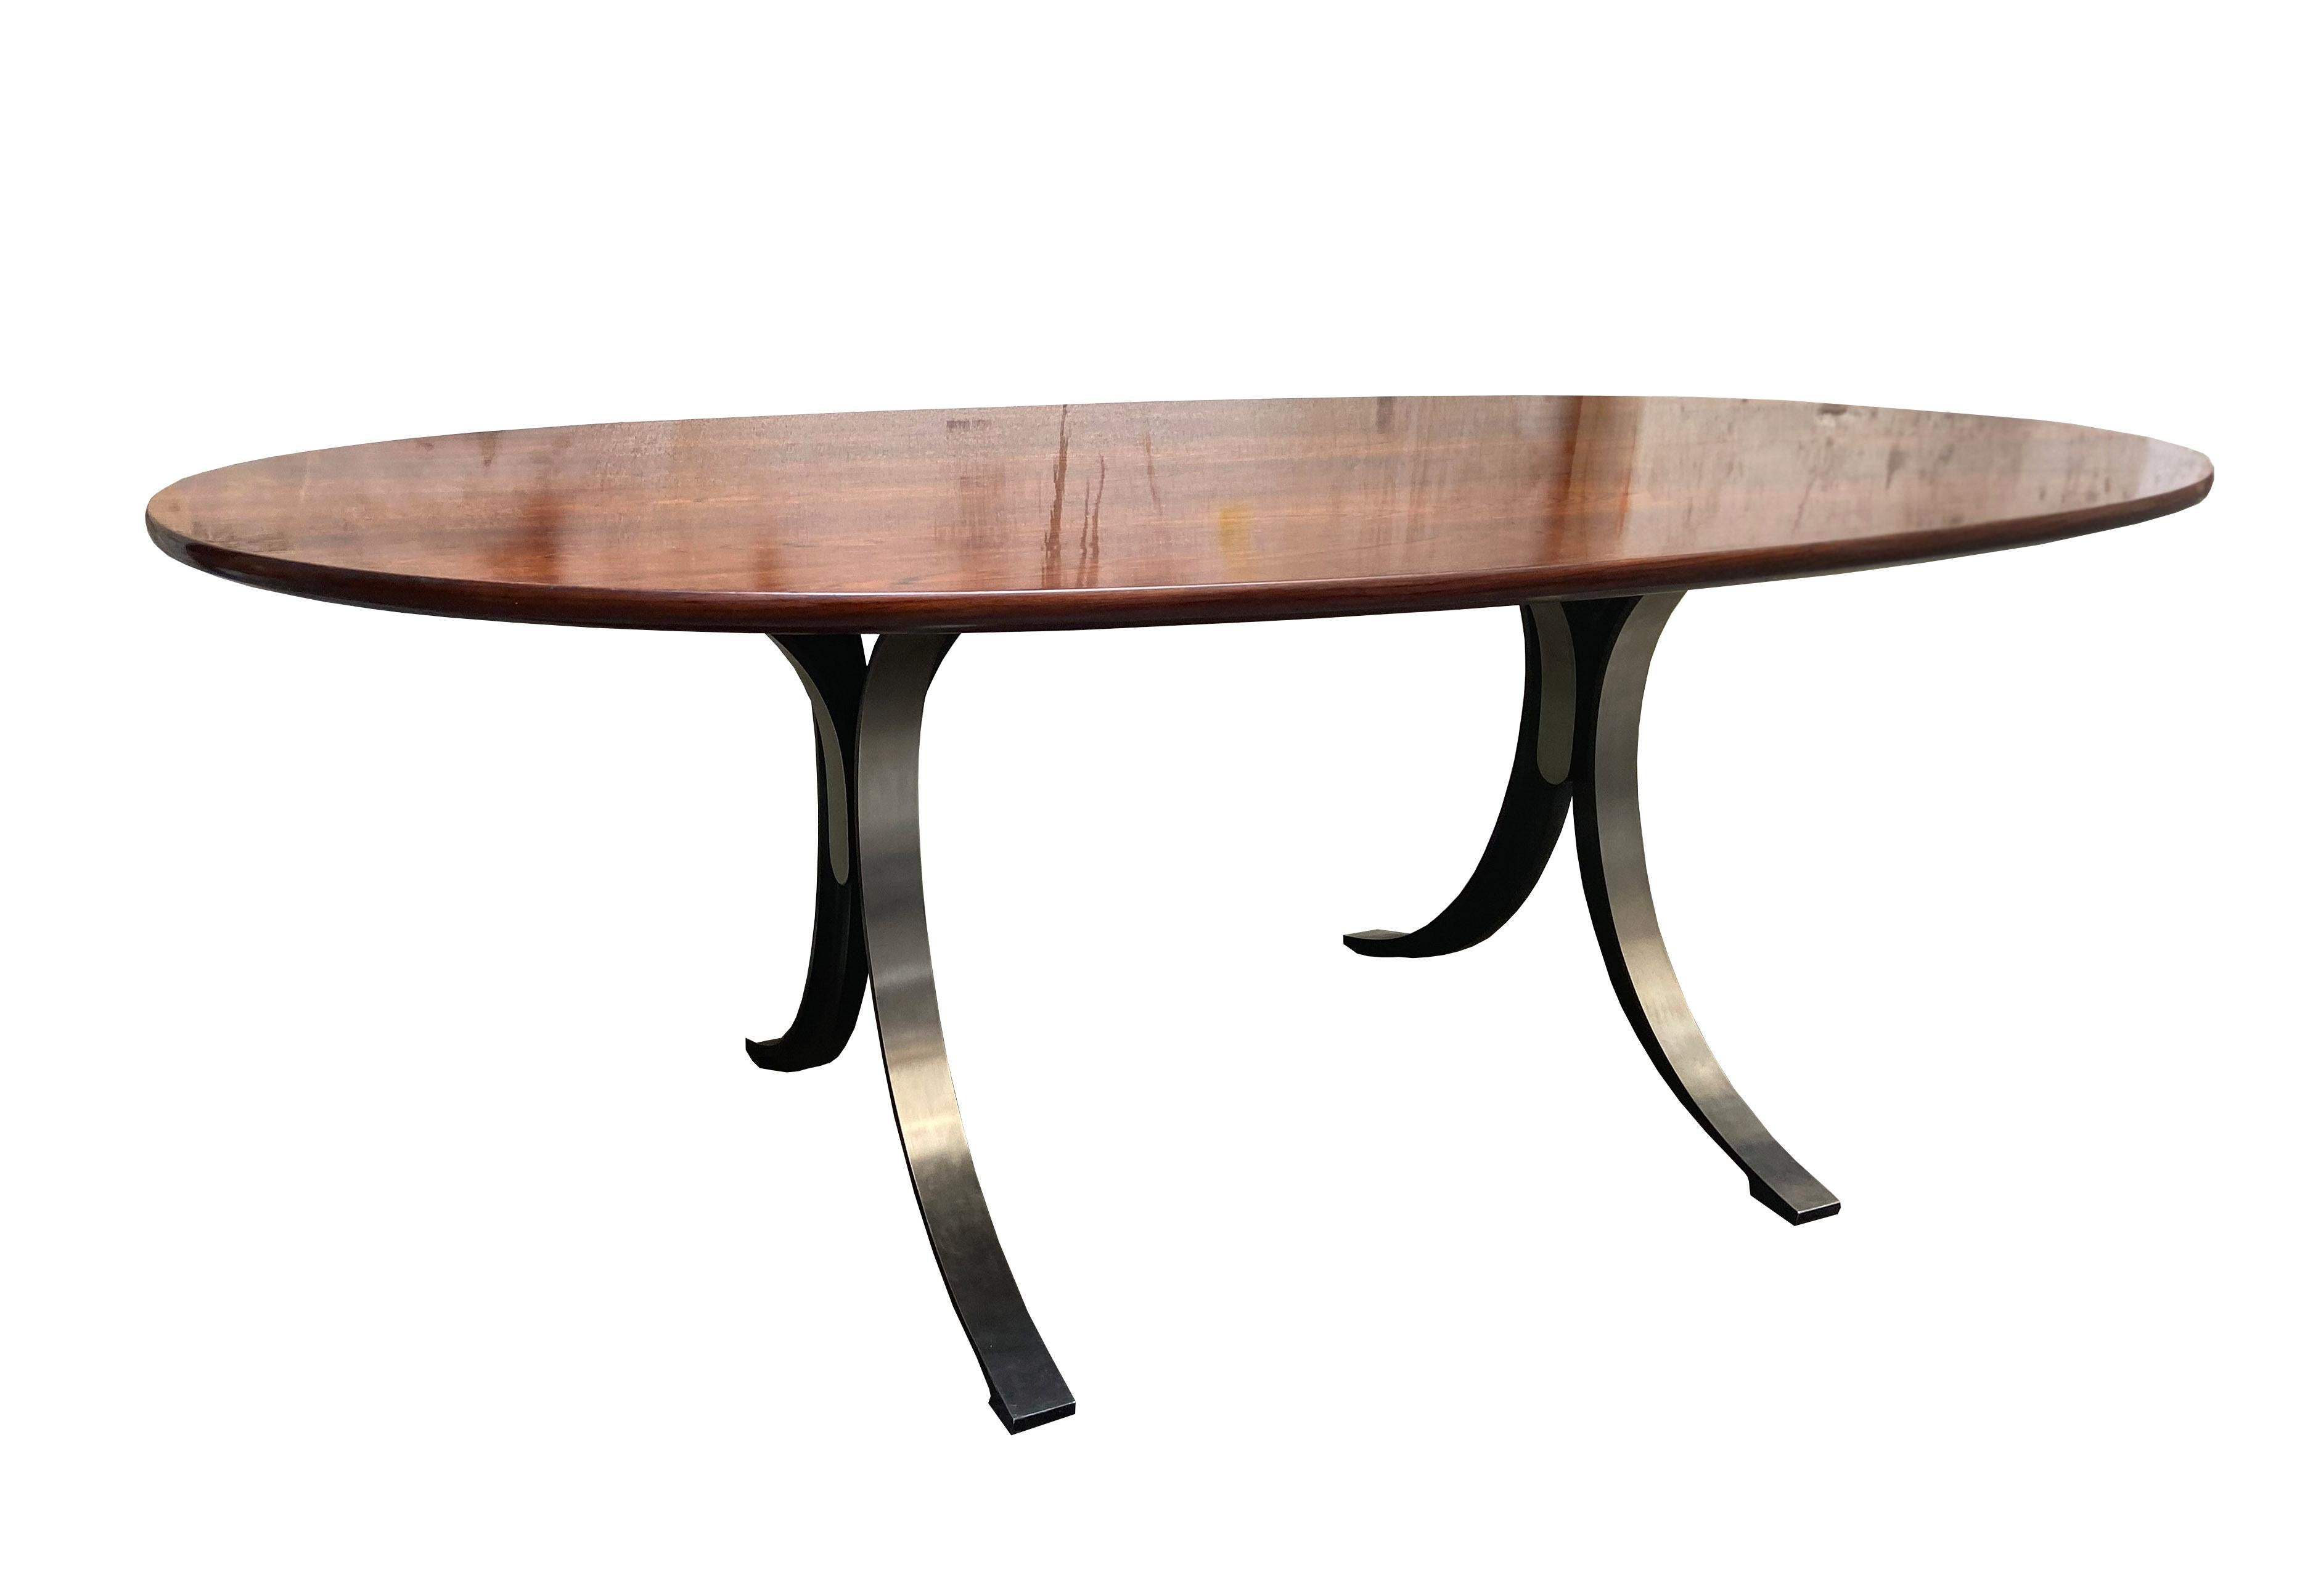 Table with structure in painted aluminum and stainless steel. Oval rosewood top.

Designed by Osvaldo Borsani with Eugenio Gerli for Tecno in 1968.
Extendable with wooden panels with book closure.
The elongated measure is 135 x 320 cm.